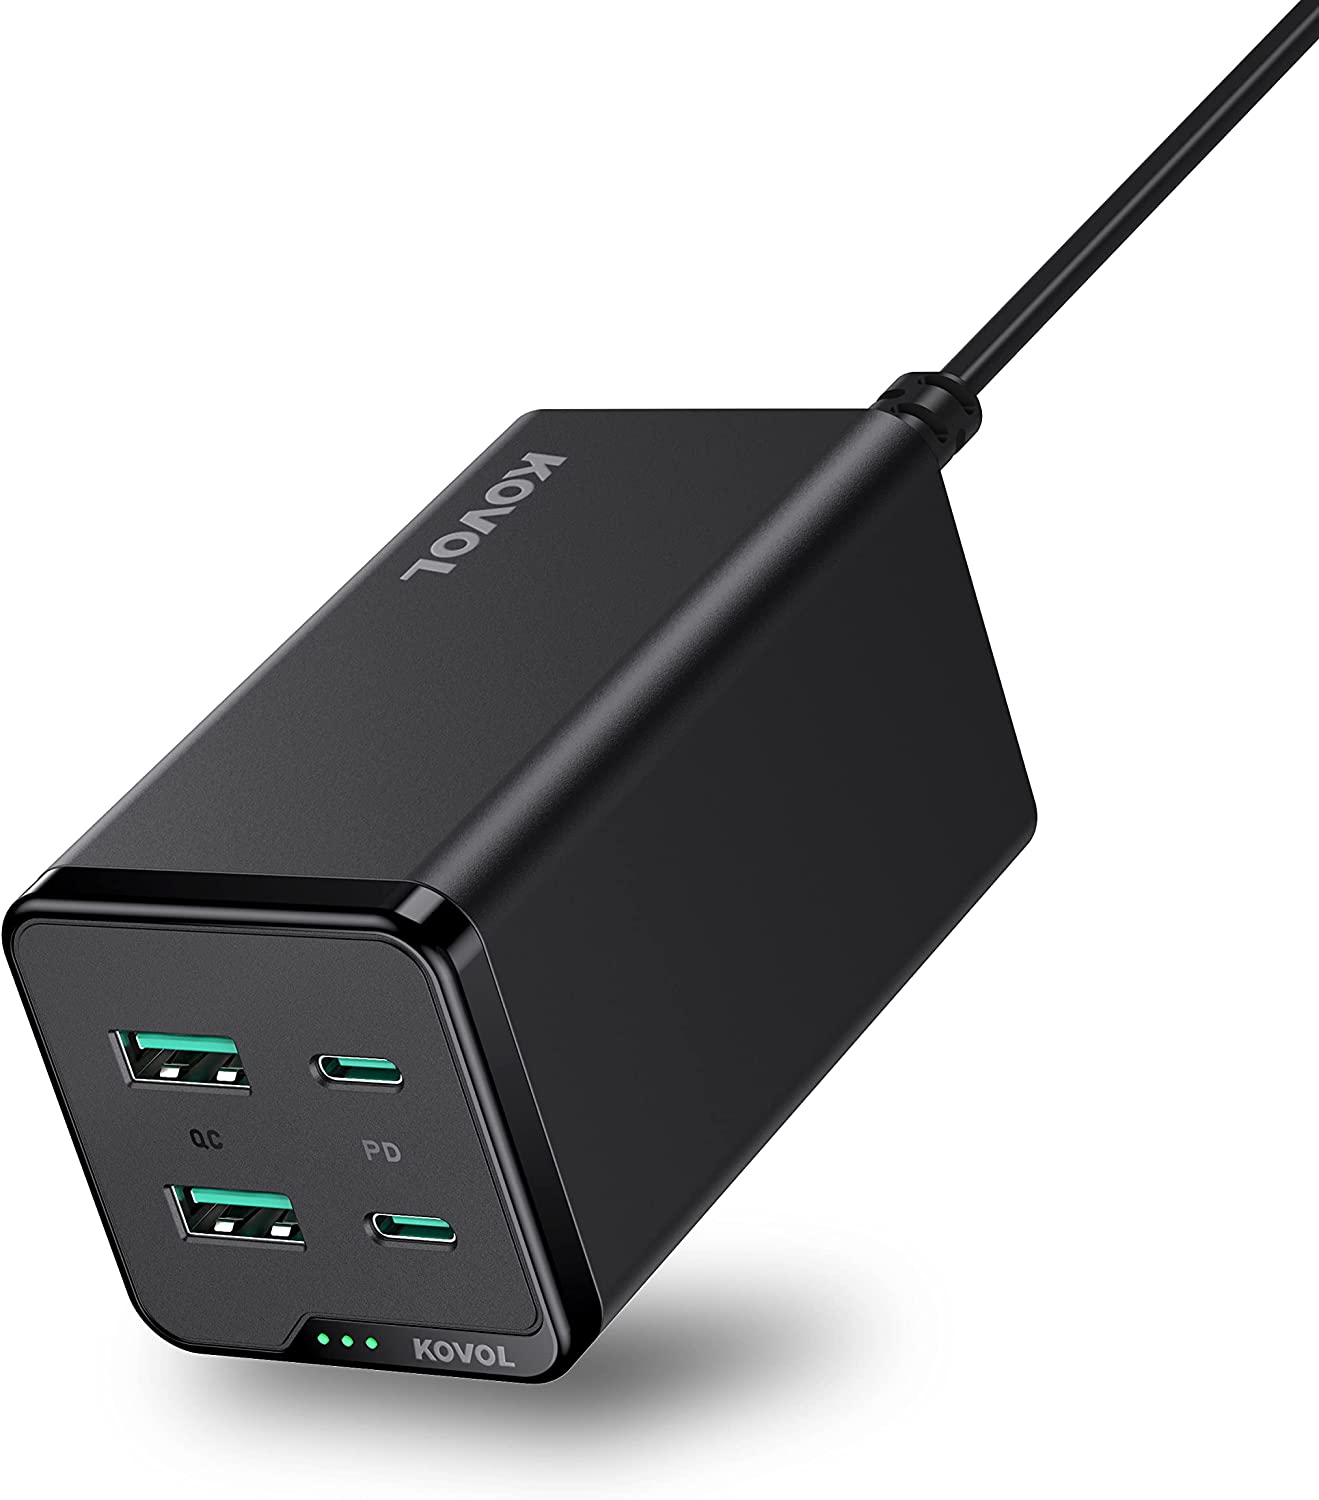 Kool's 120W Sprint charger offers fast charging for MacBooks and other devices.